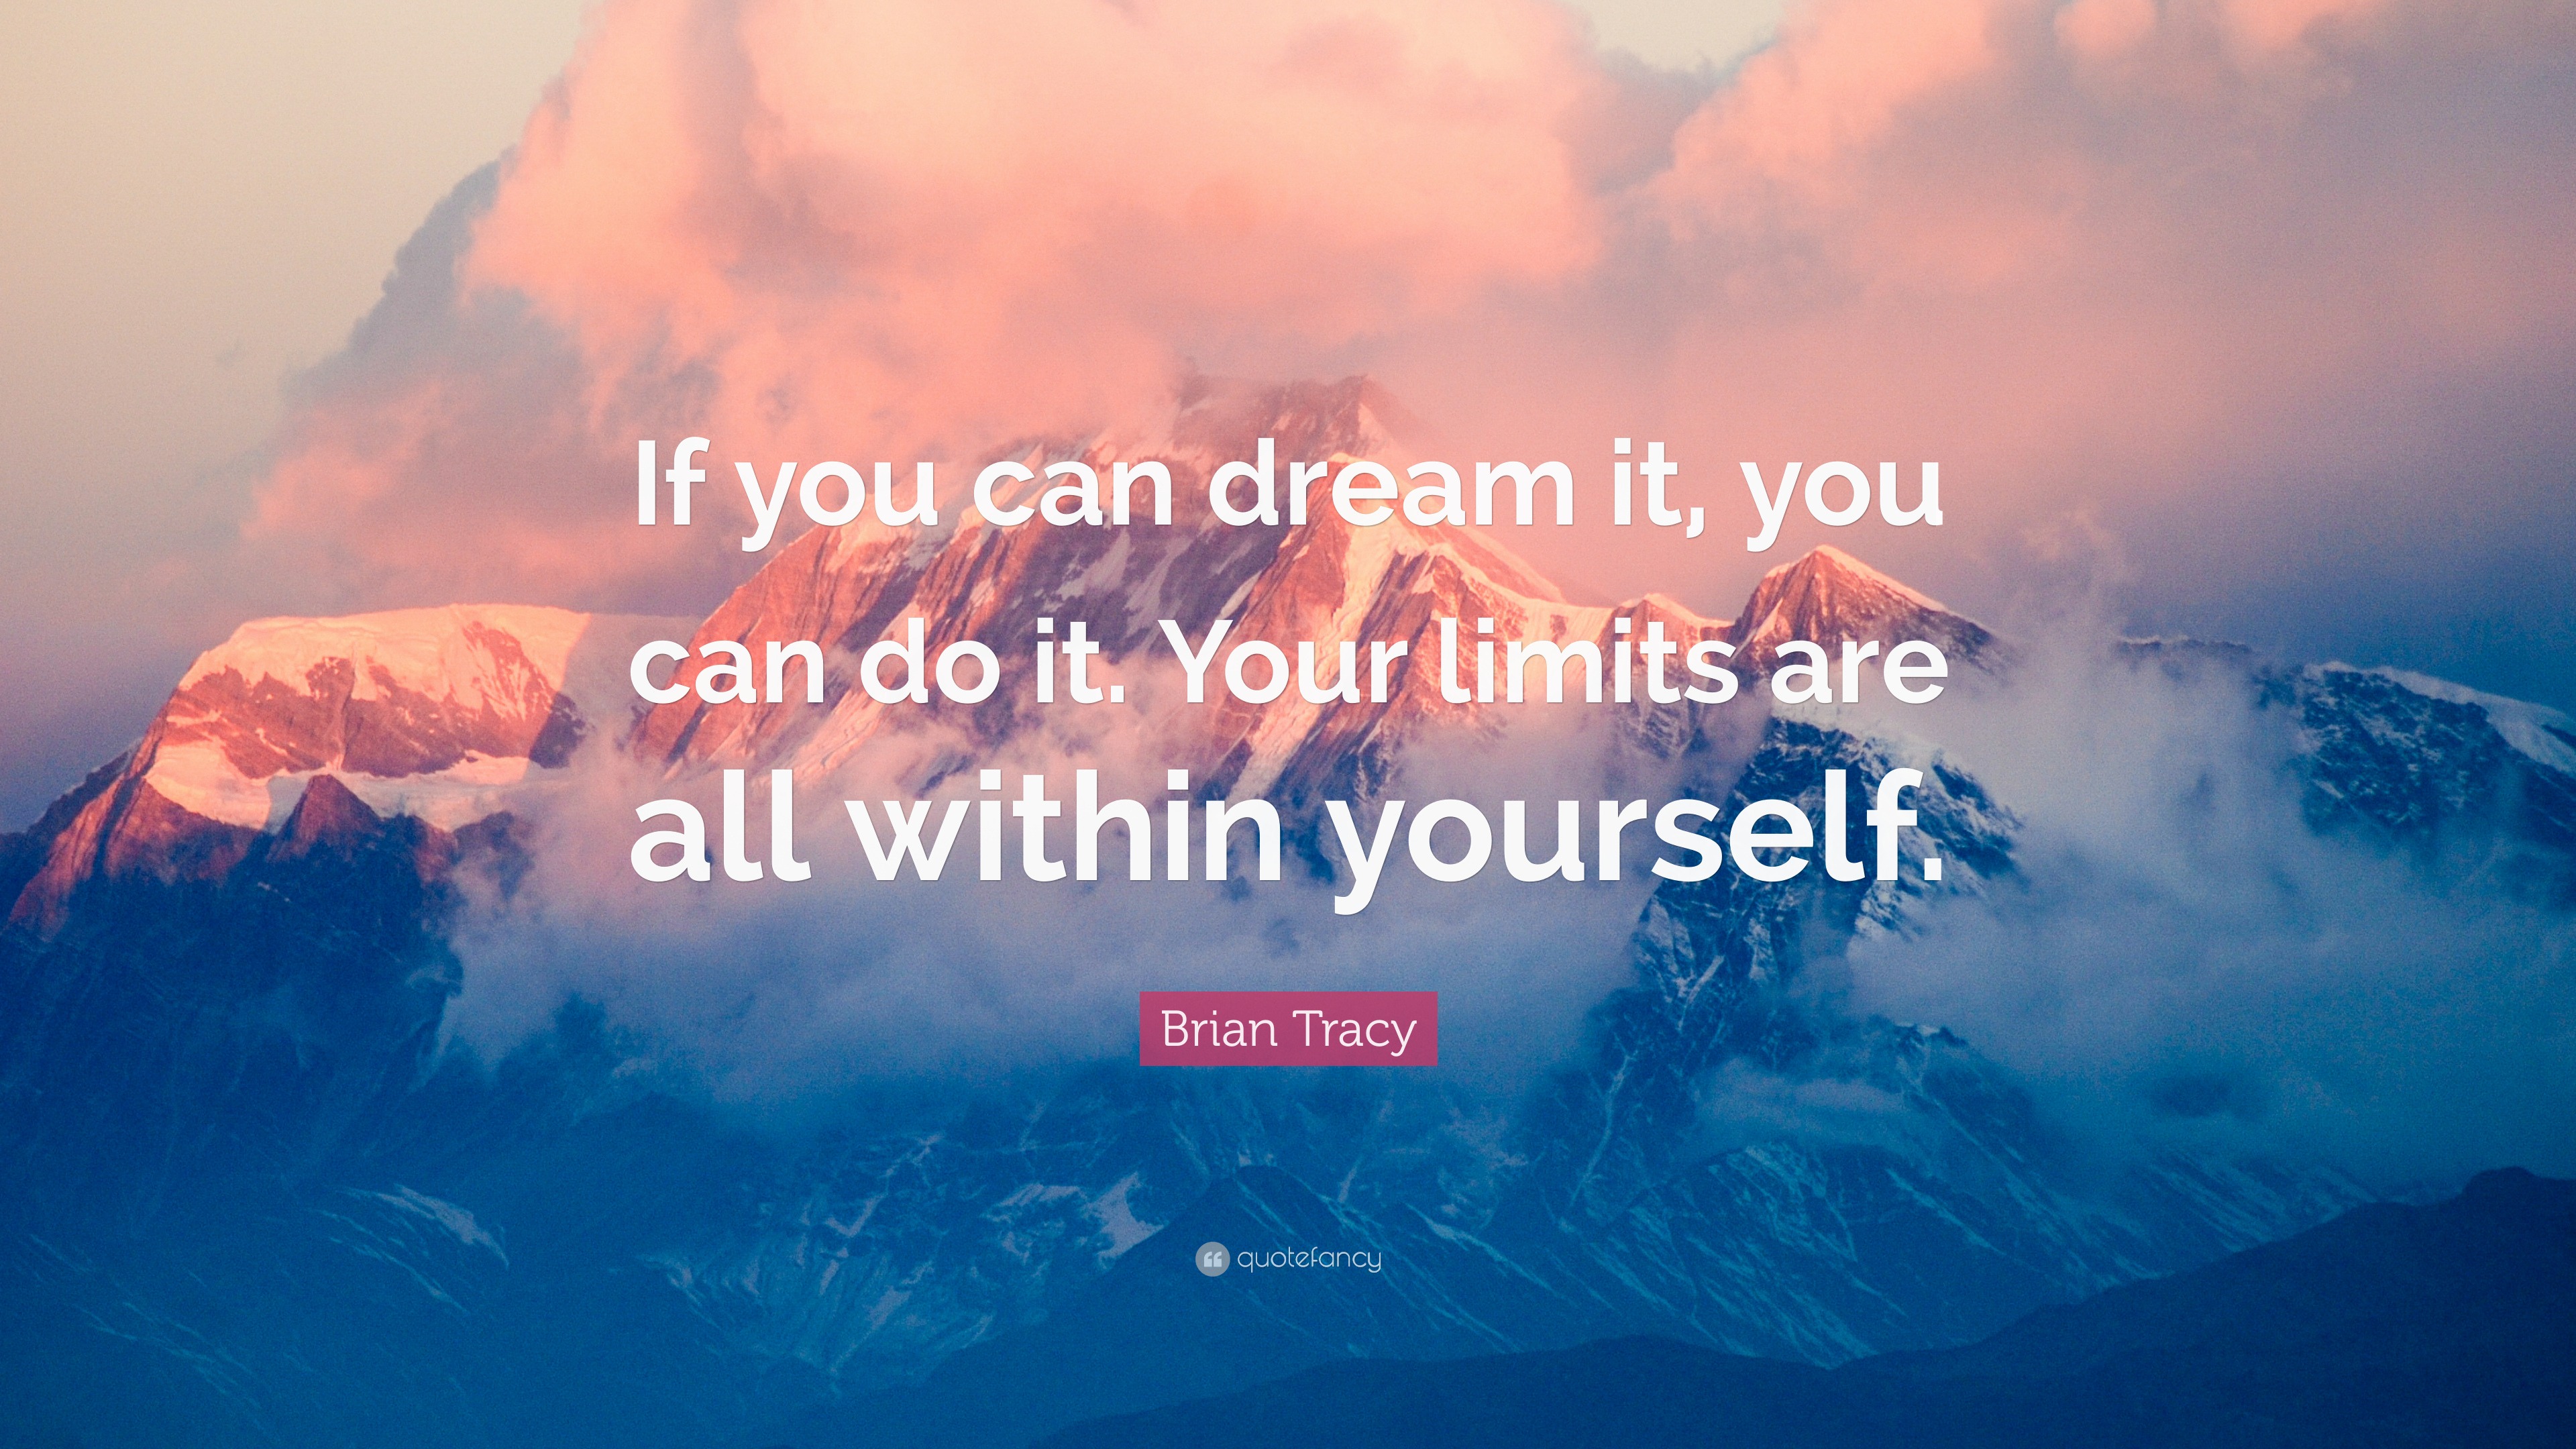 Brian Tracy Quote: “If you can dream it, you can do it. Your limits are ...